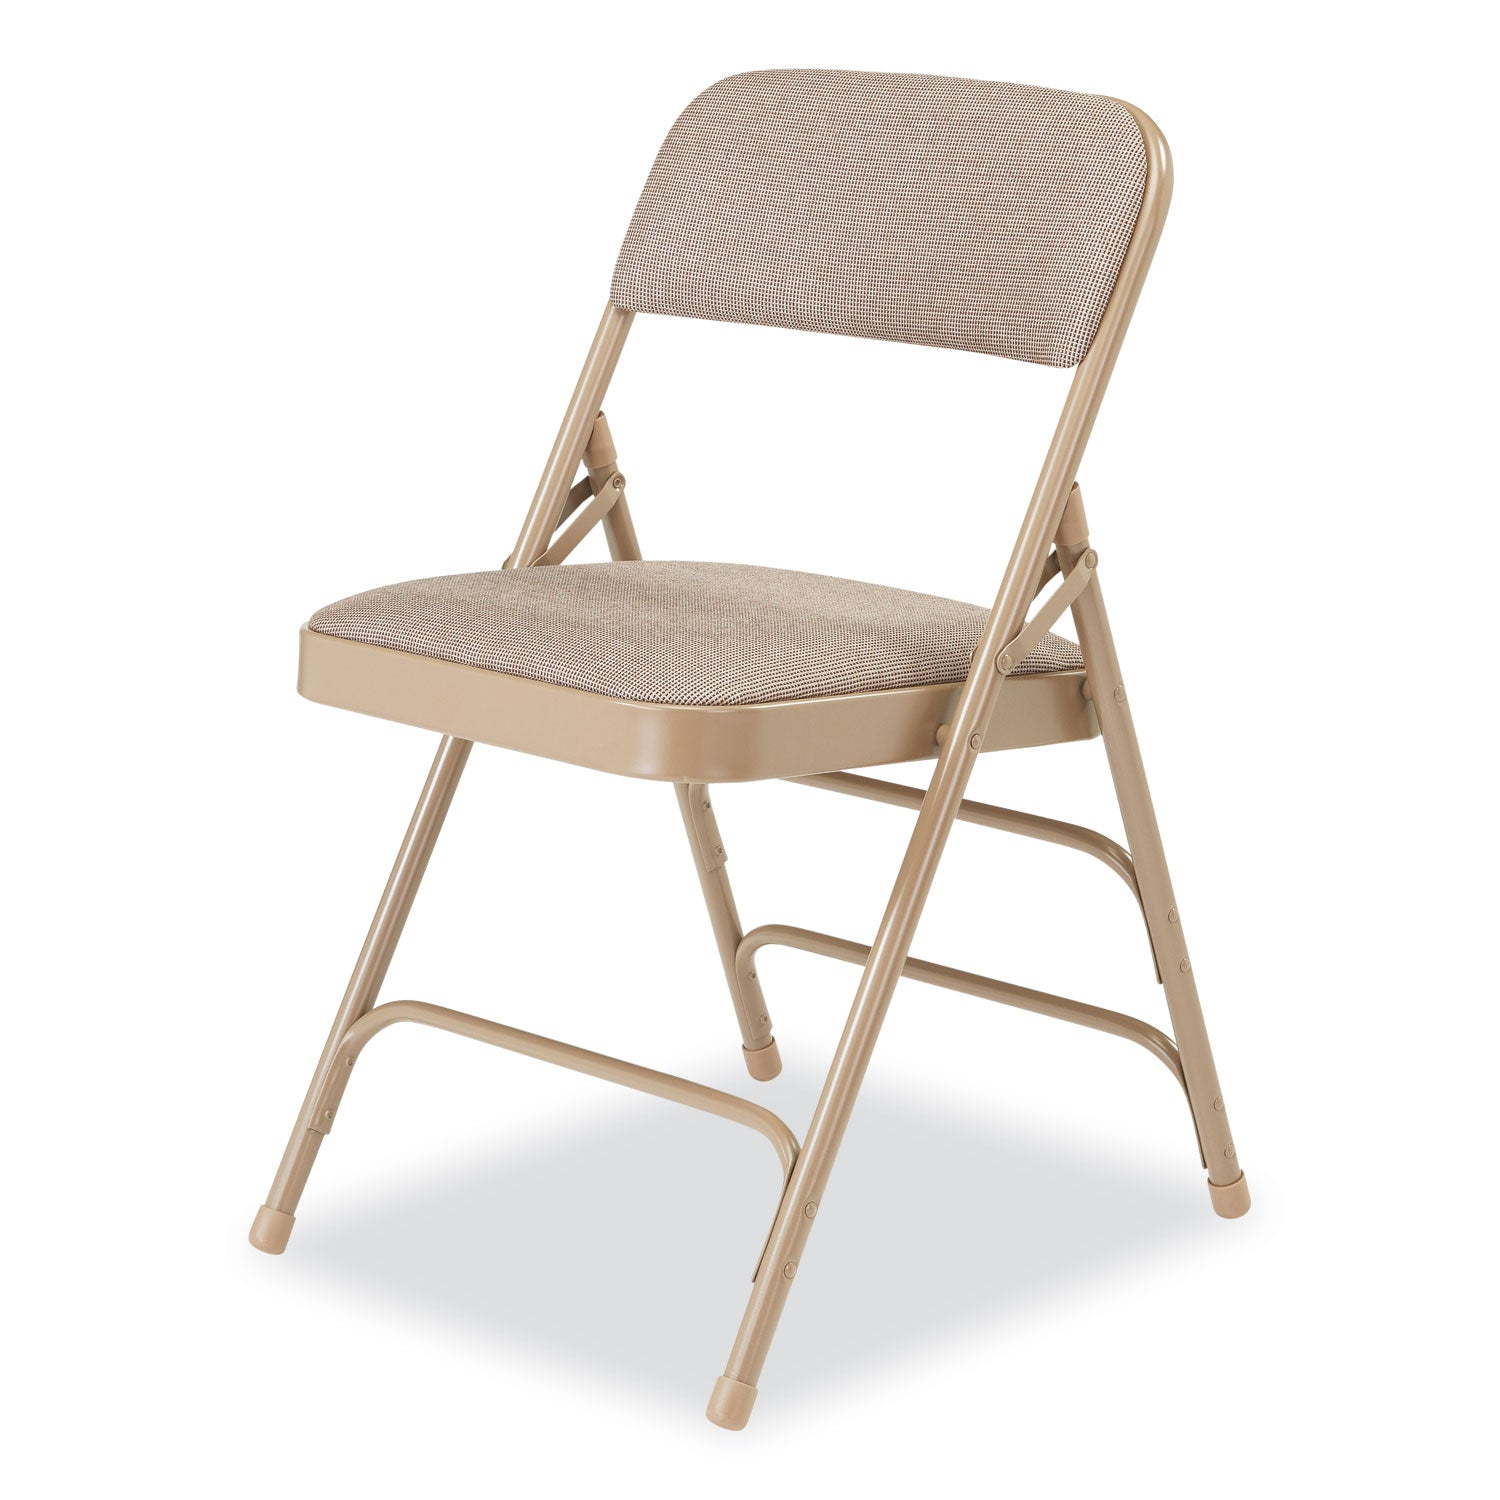 2300-series-fabric-triple-brace-double-hinge-premium-folding-chair-supports-500-lb-cafe-beige-4-ct-ships-in-1-3-bus-days_nps2301 - 3